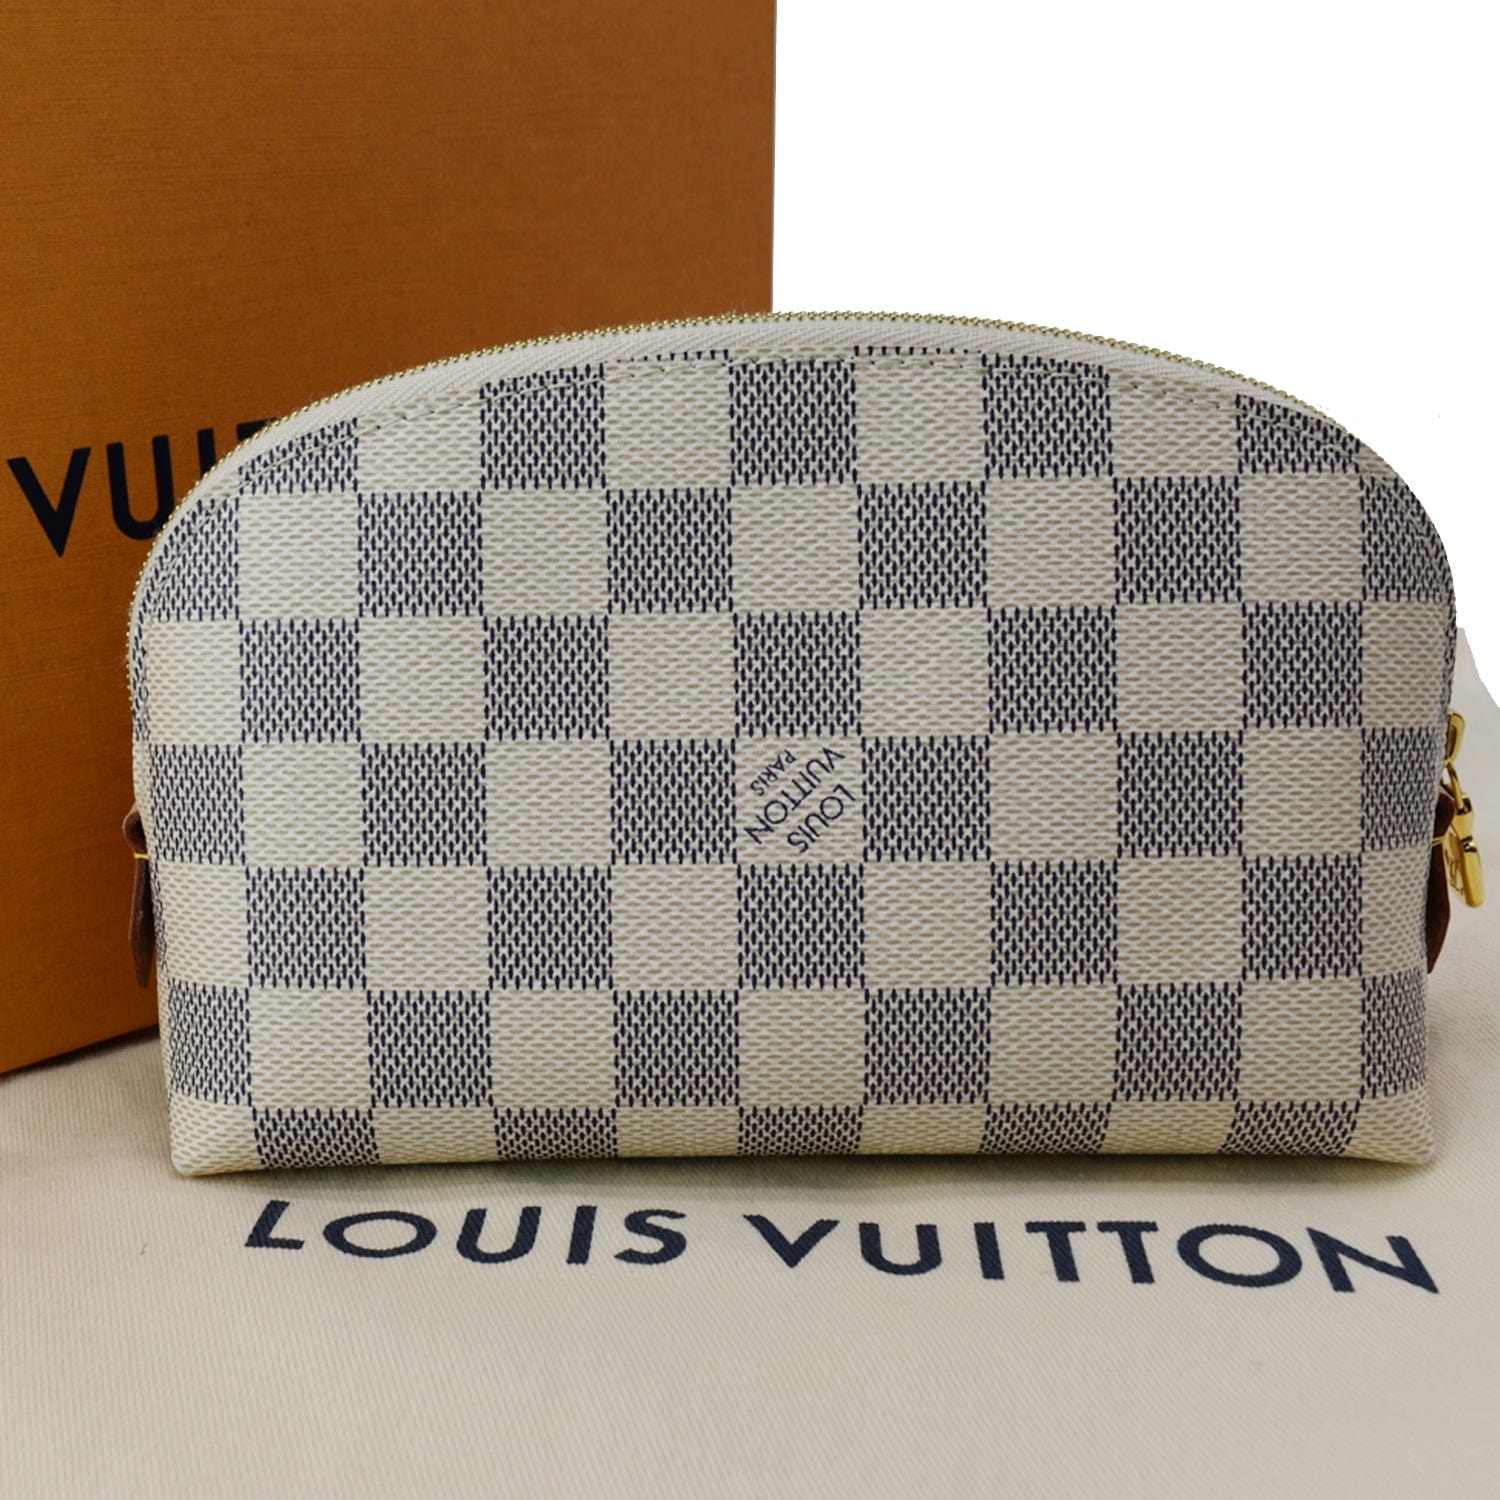 Louis Vuitton said “no more plastic” with its plastic freezer bag - Culted